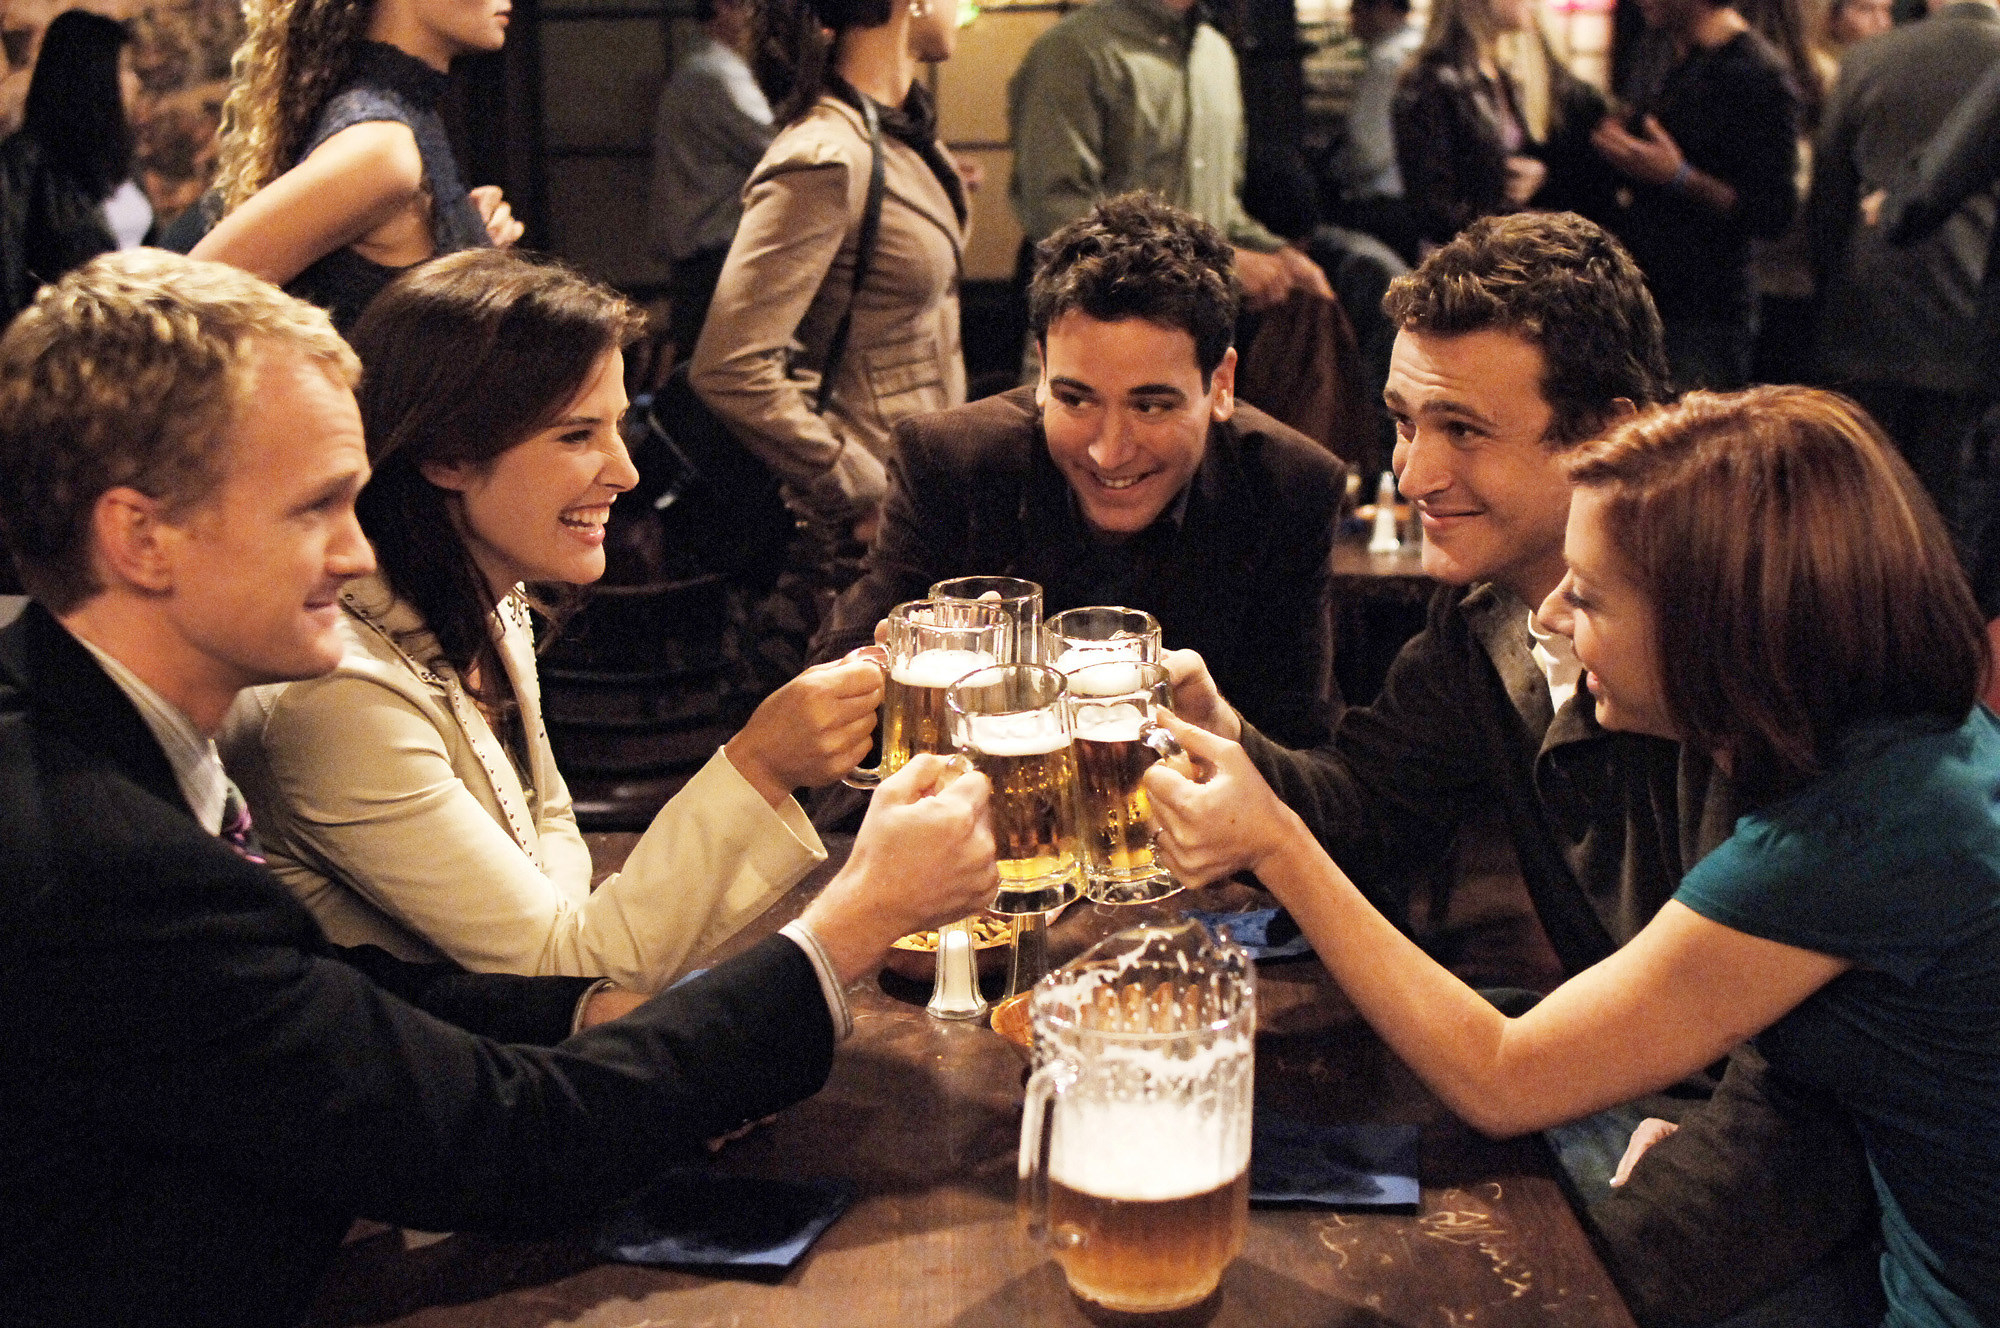 The cast of HIMYM does a group cheers with mugs of beer